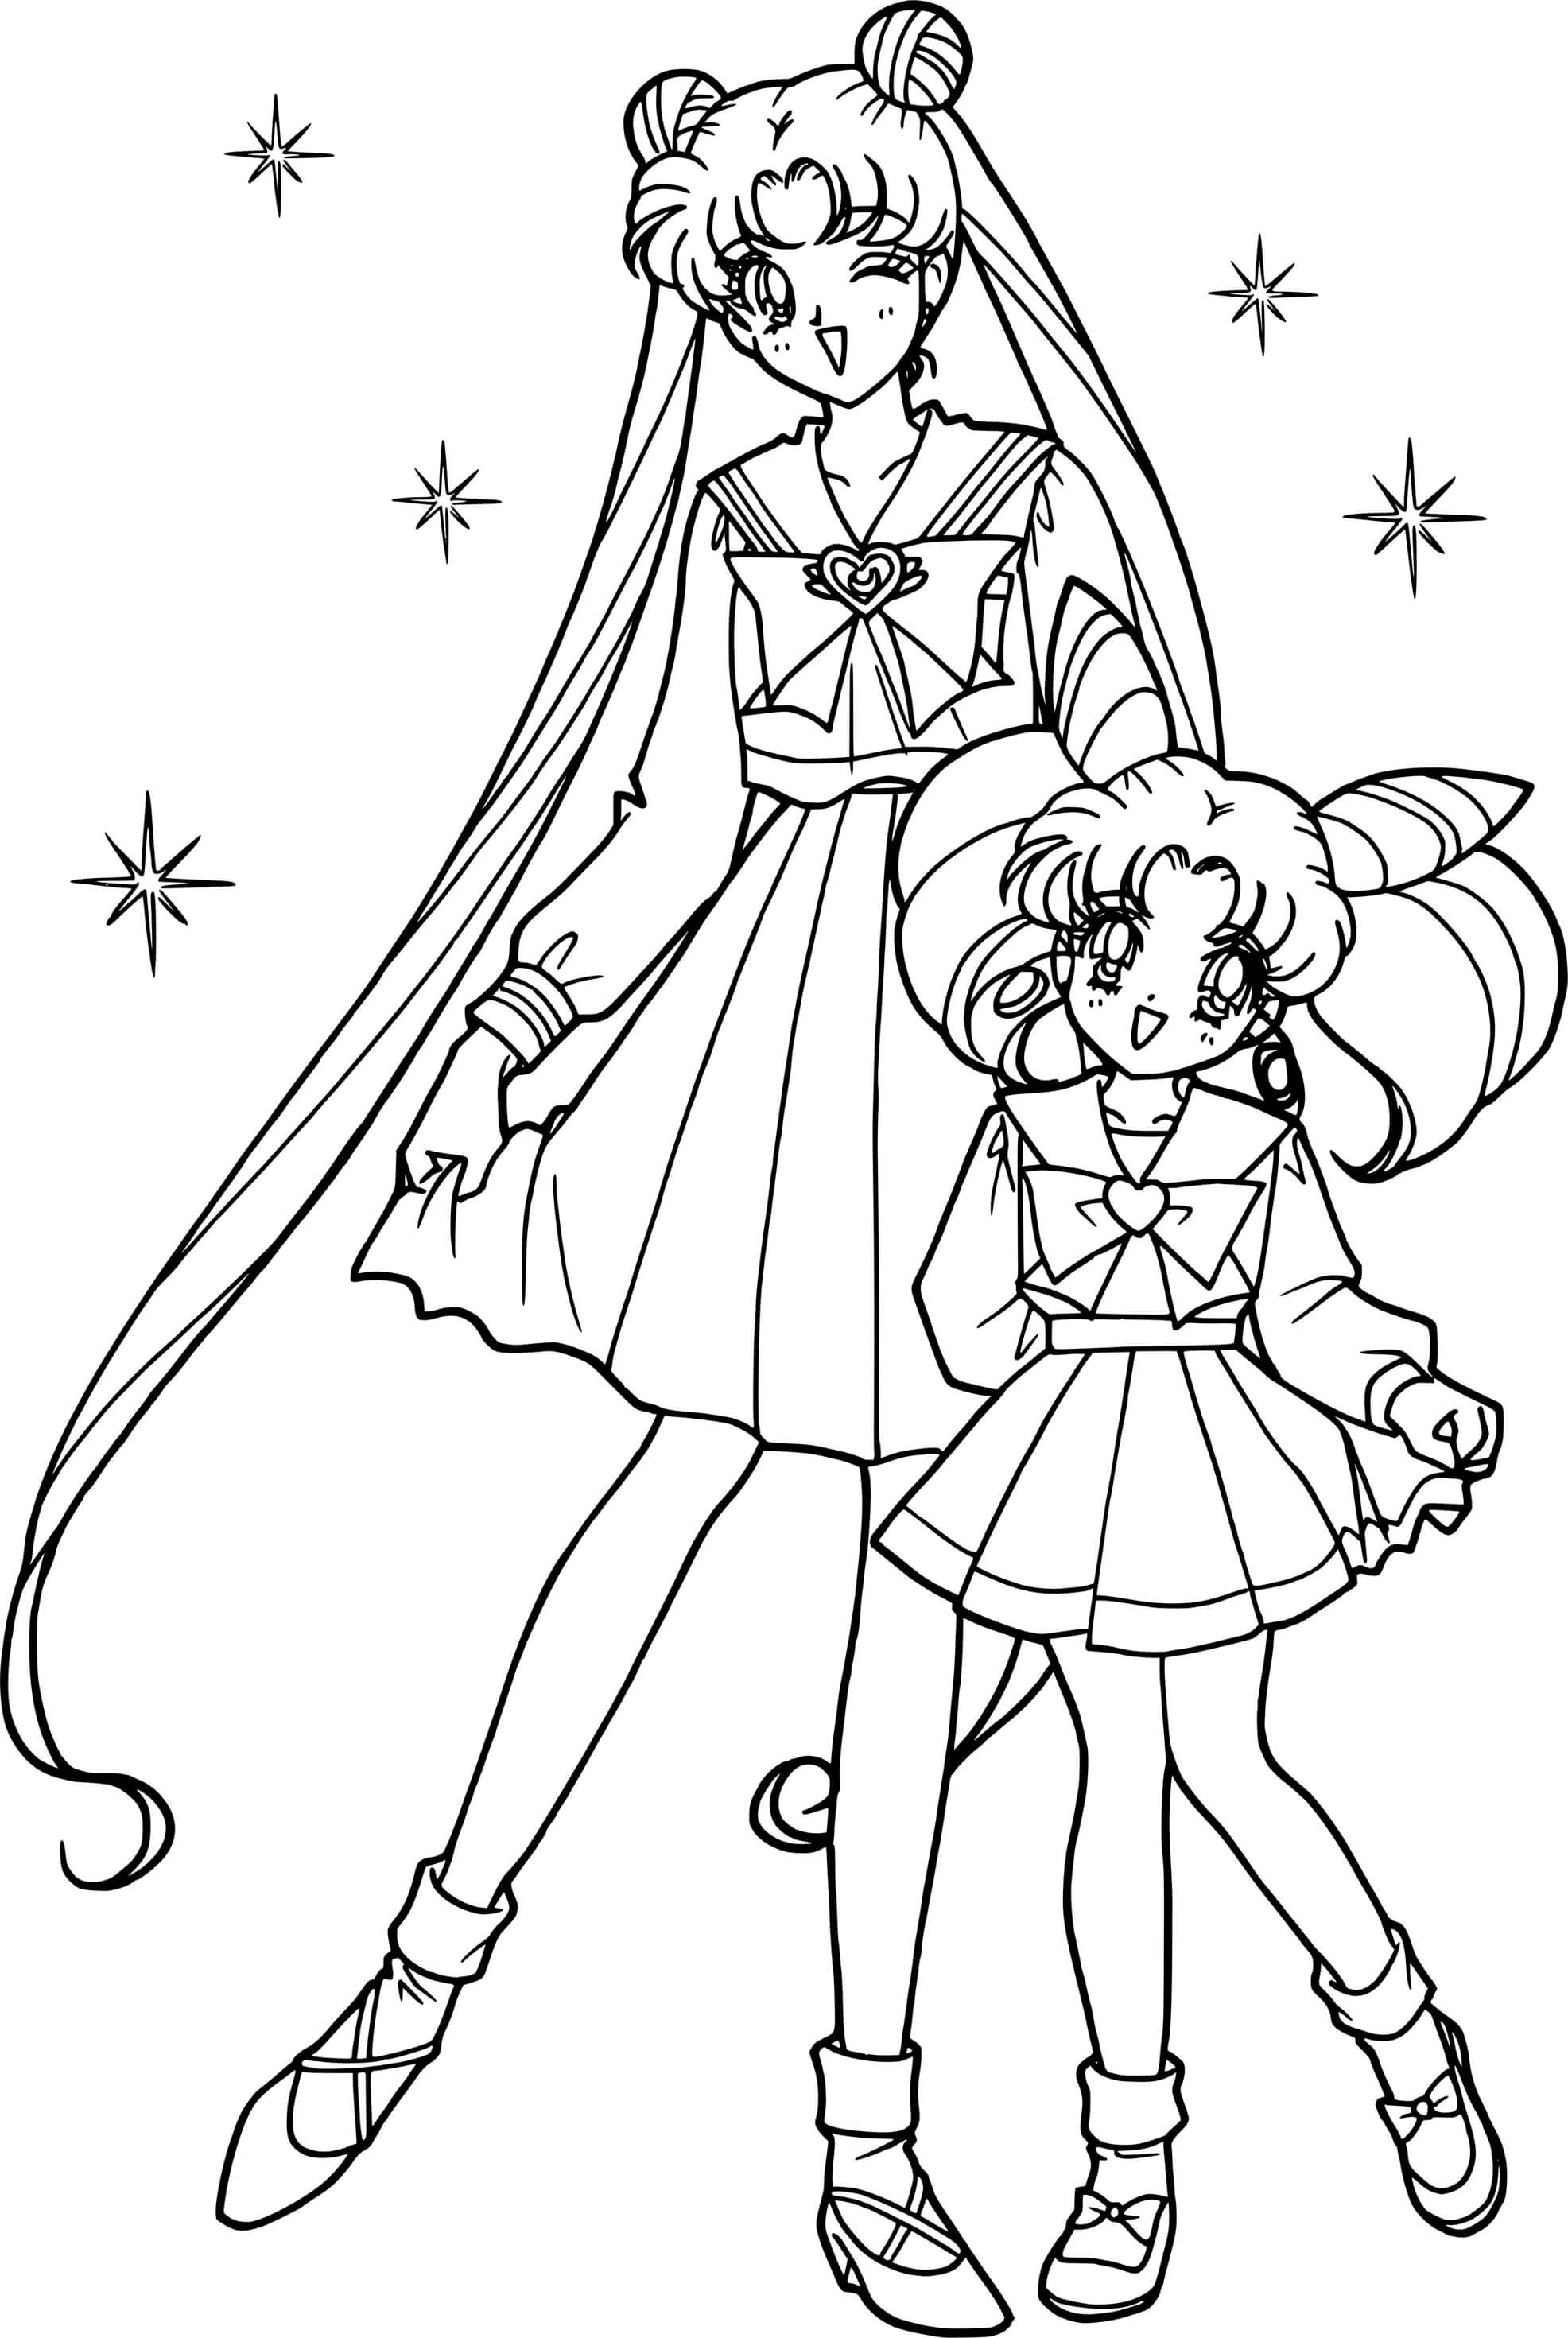 Sailor Moon Coloring Pages   Coloring Cool